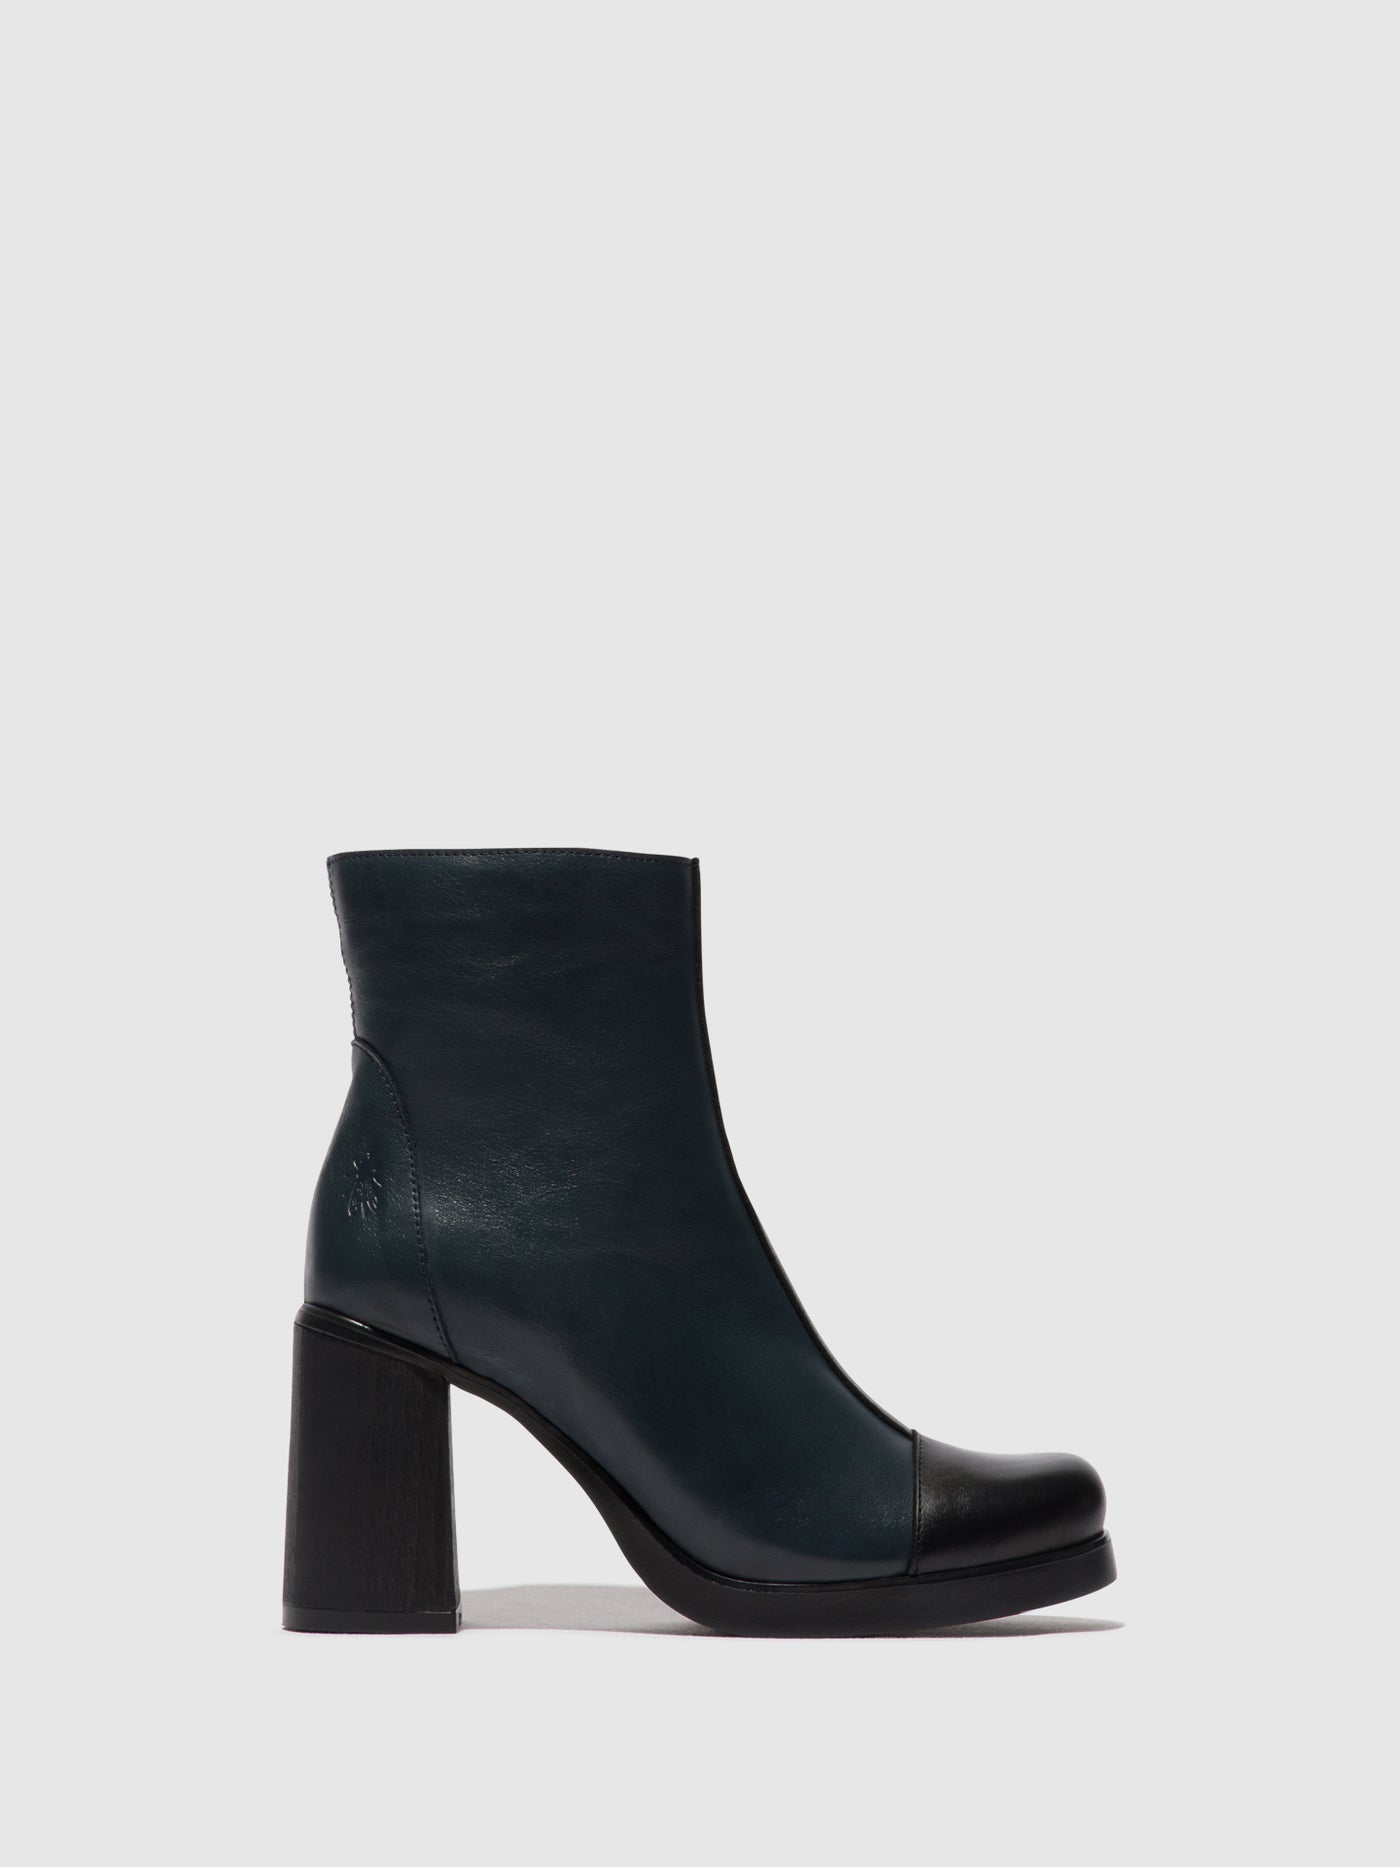 Zip Up Ankle Boots STIR985FLY BLACK/NAVY